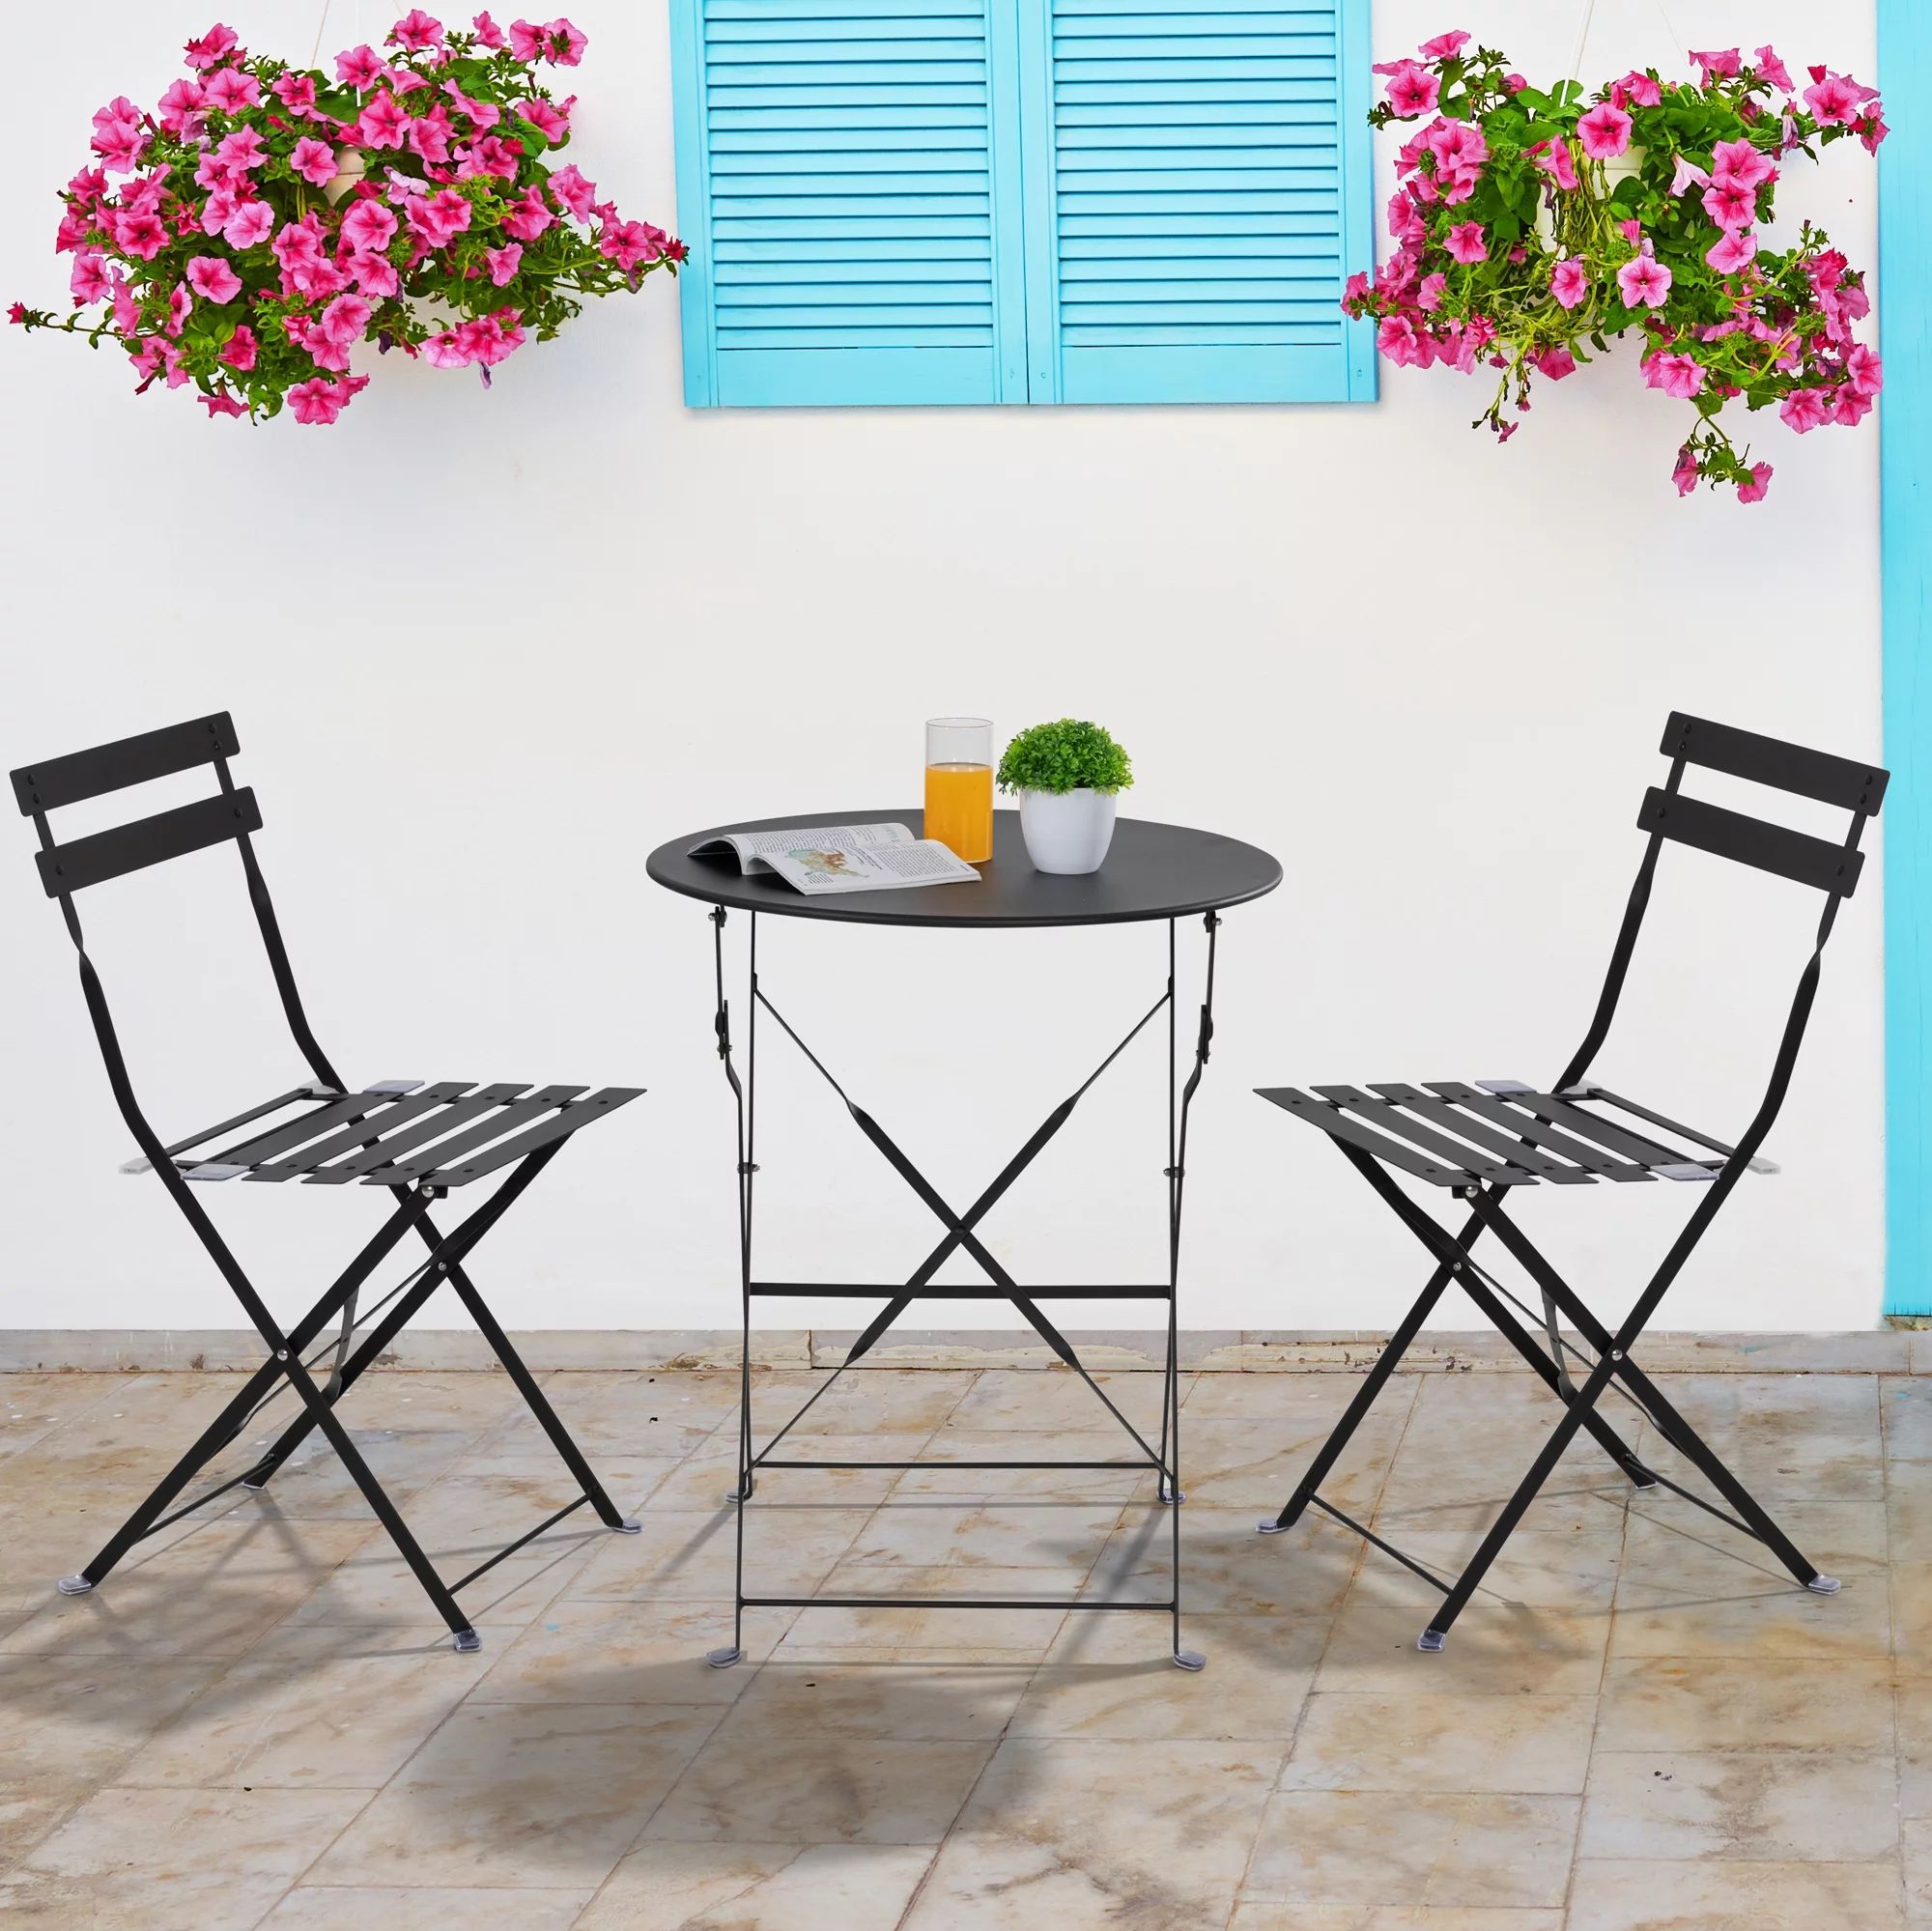 Walsunny 3 Pieces Black Bistro Sets with 2 Folding Metal Chairs and Table | Walmart (US)